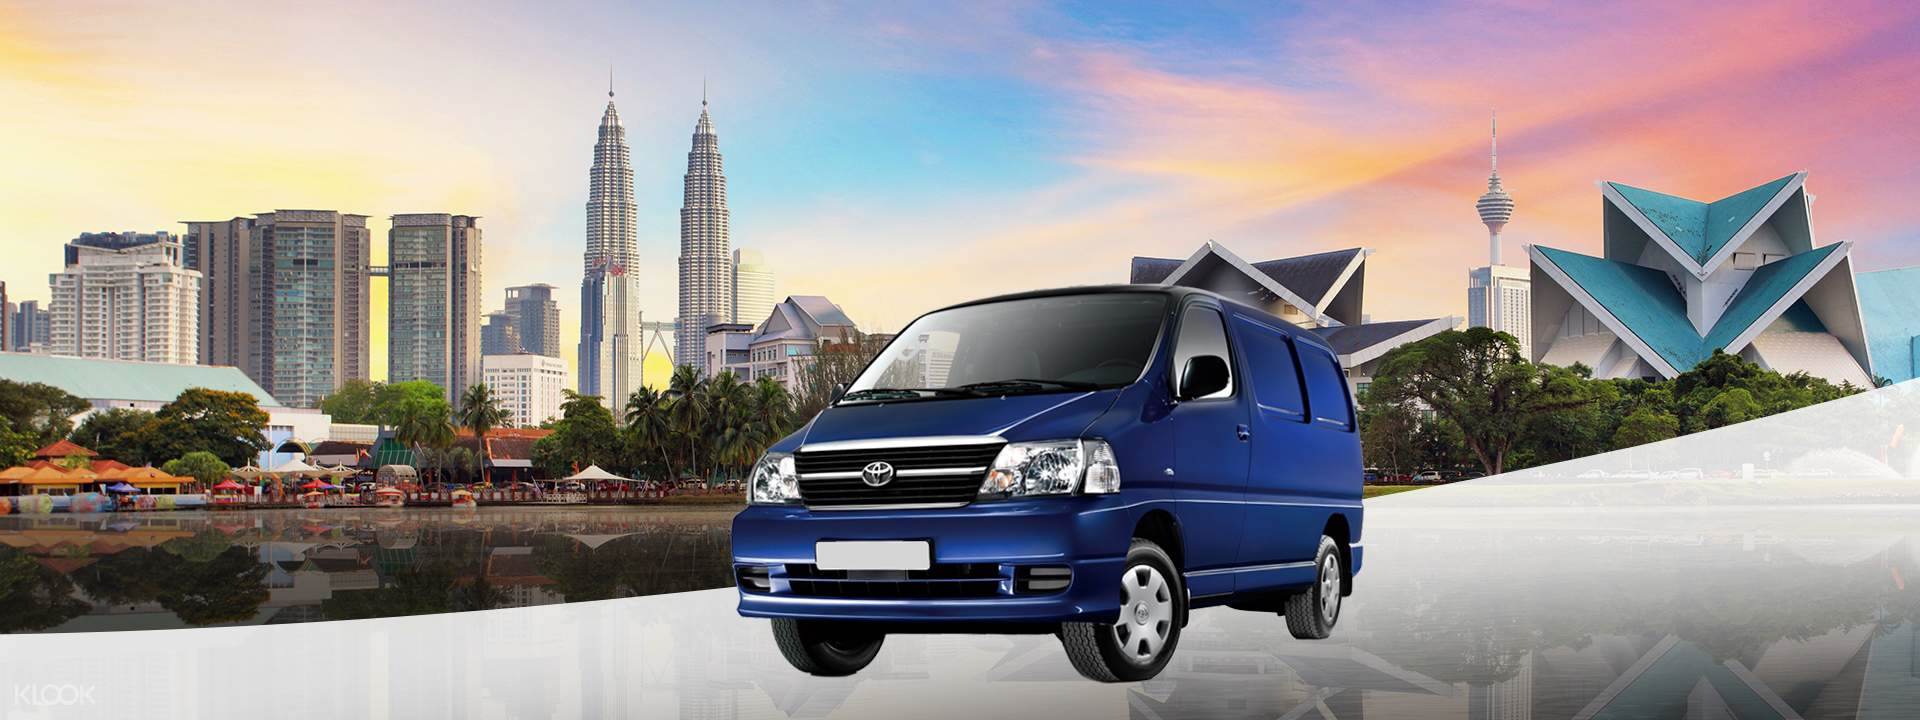 Kuala Lumpur Private Car Charter (Full Day) Price 2023 + [Promotions